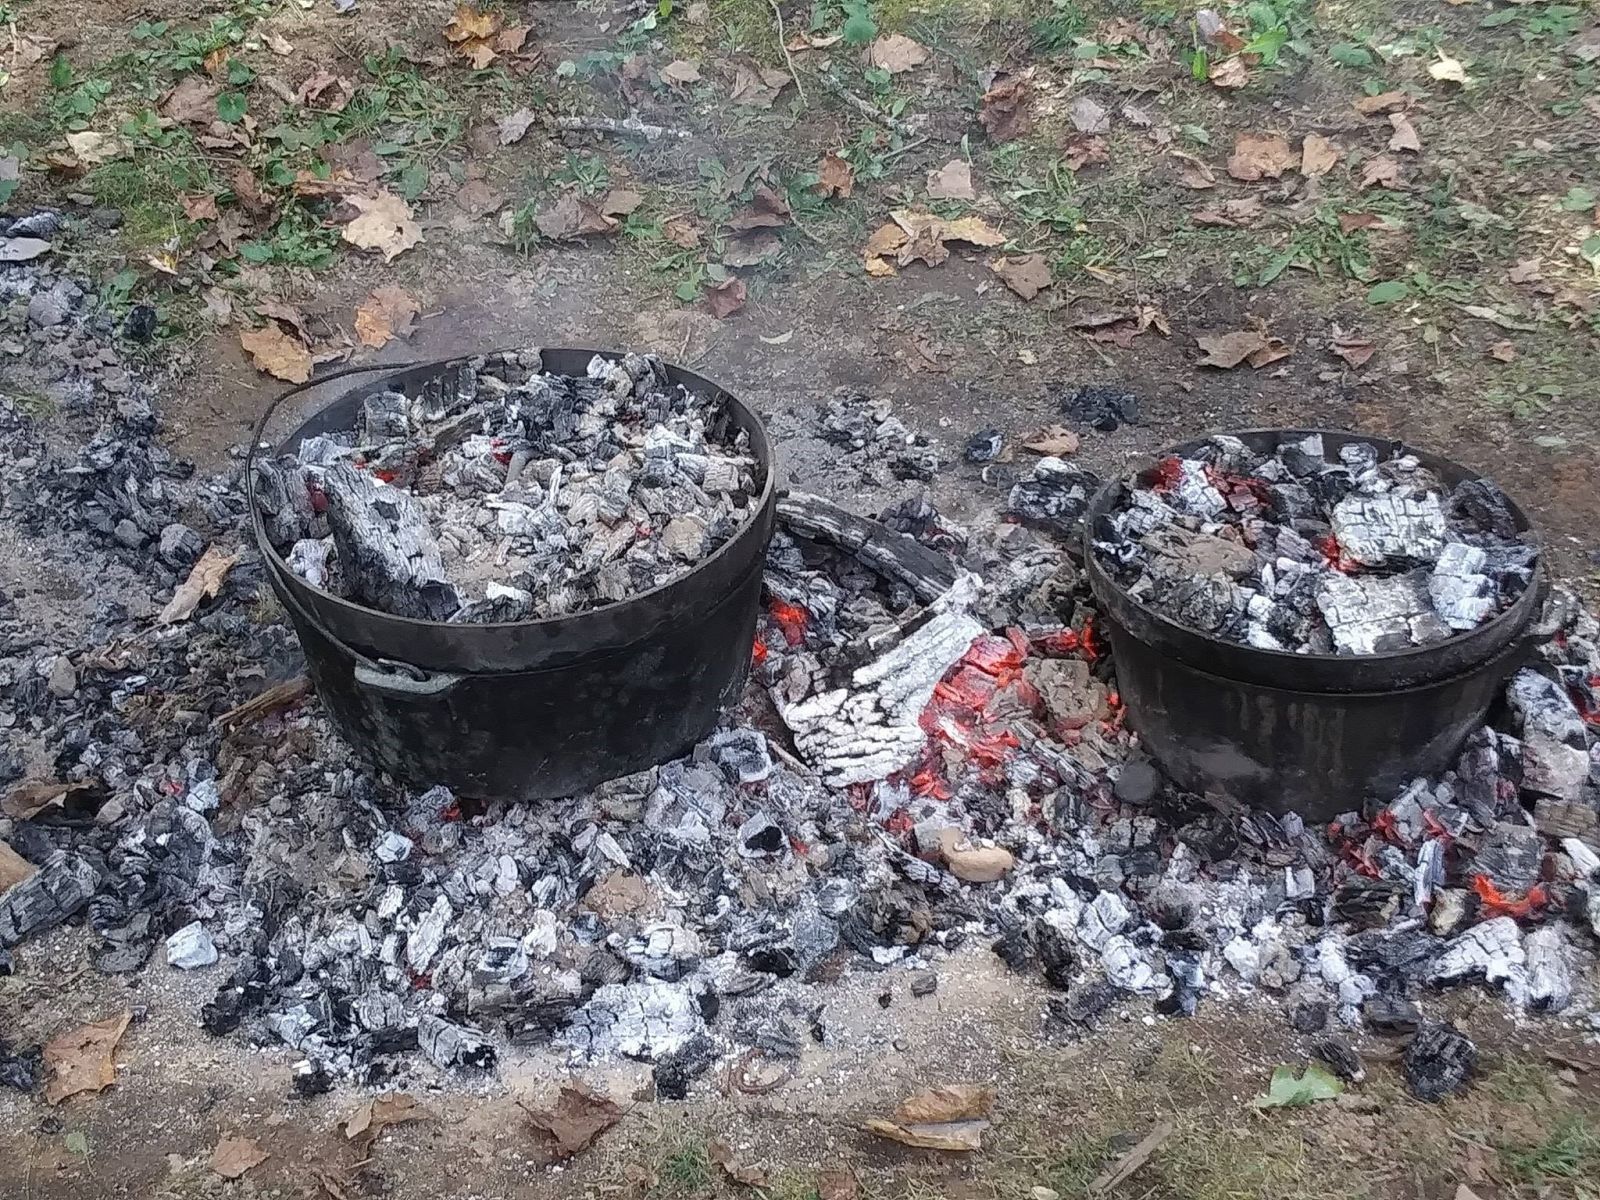 This image show 2 different size castiron camp ovens cooking side by side